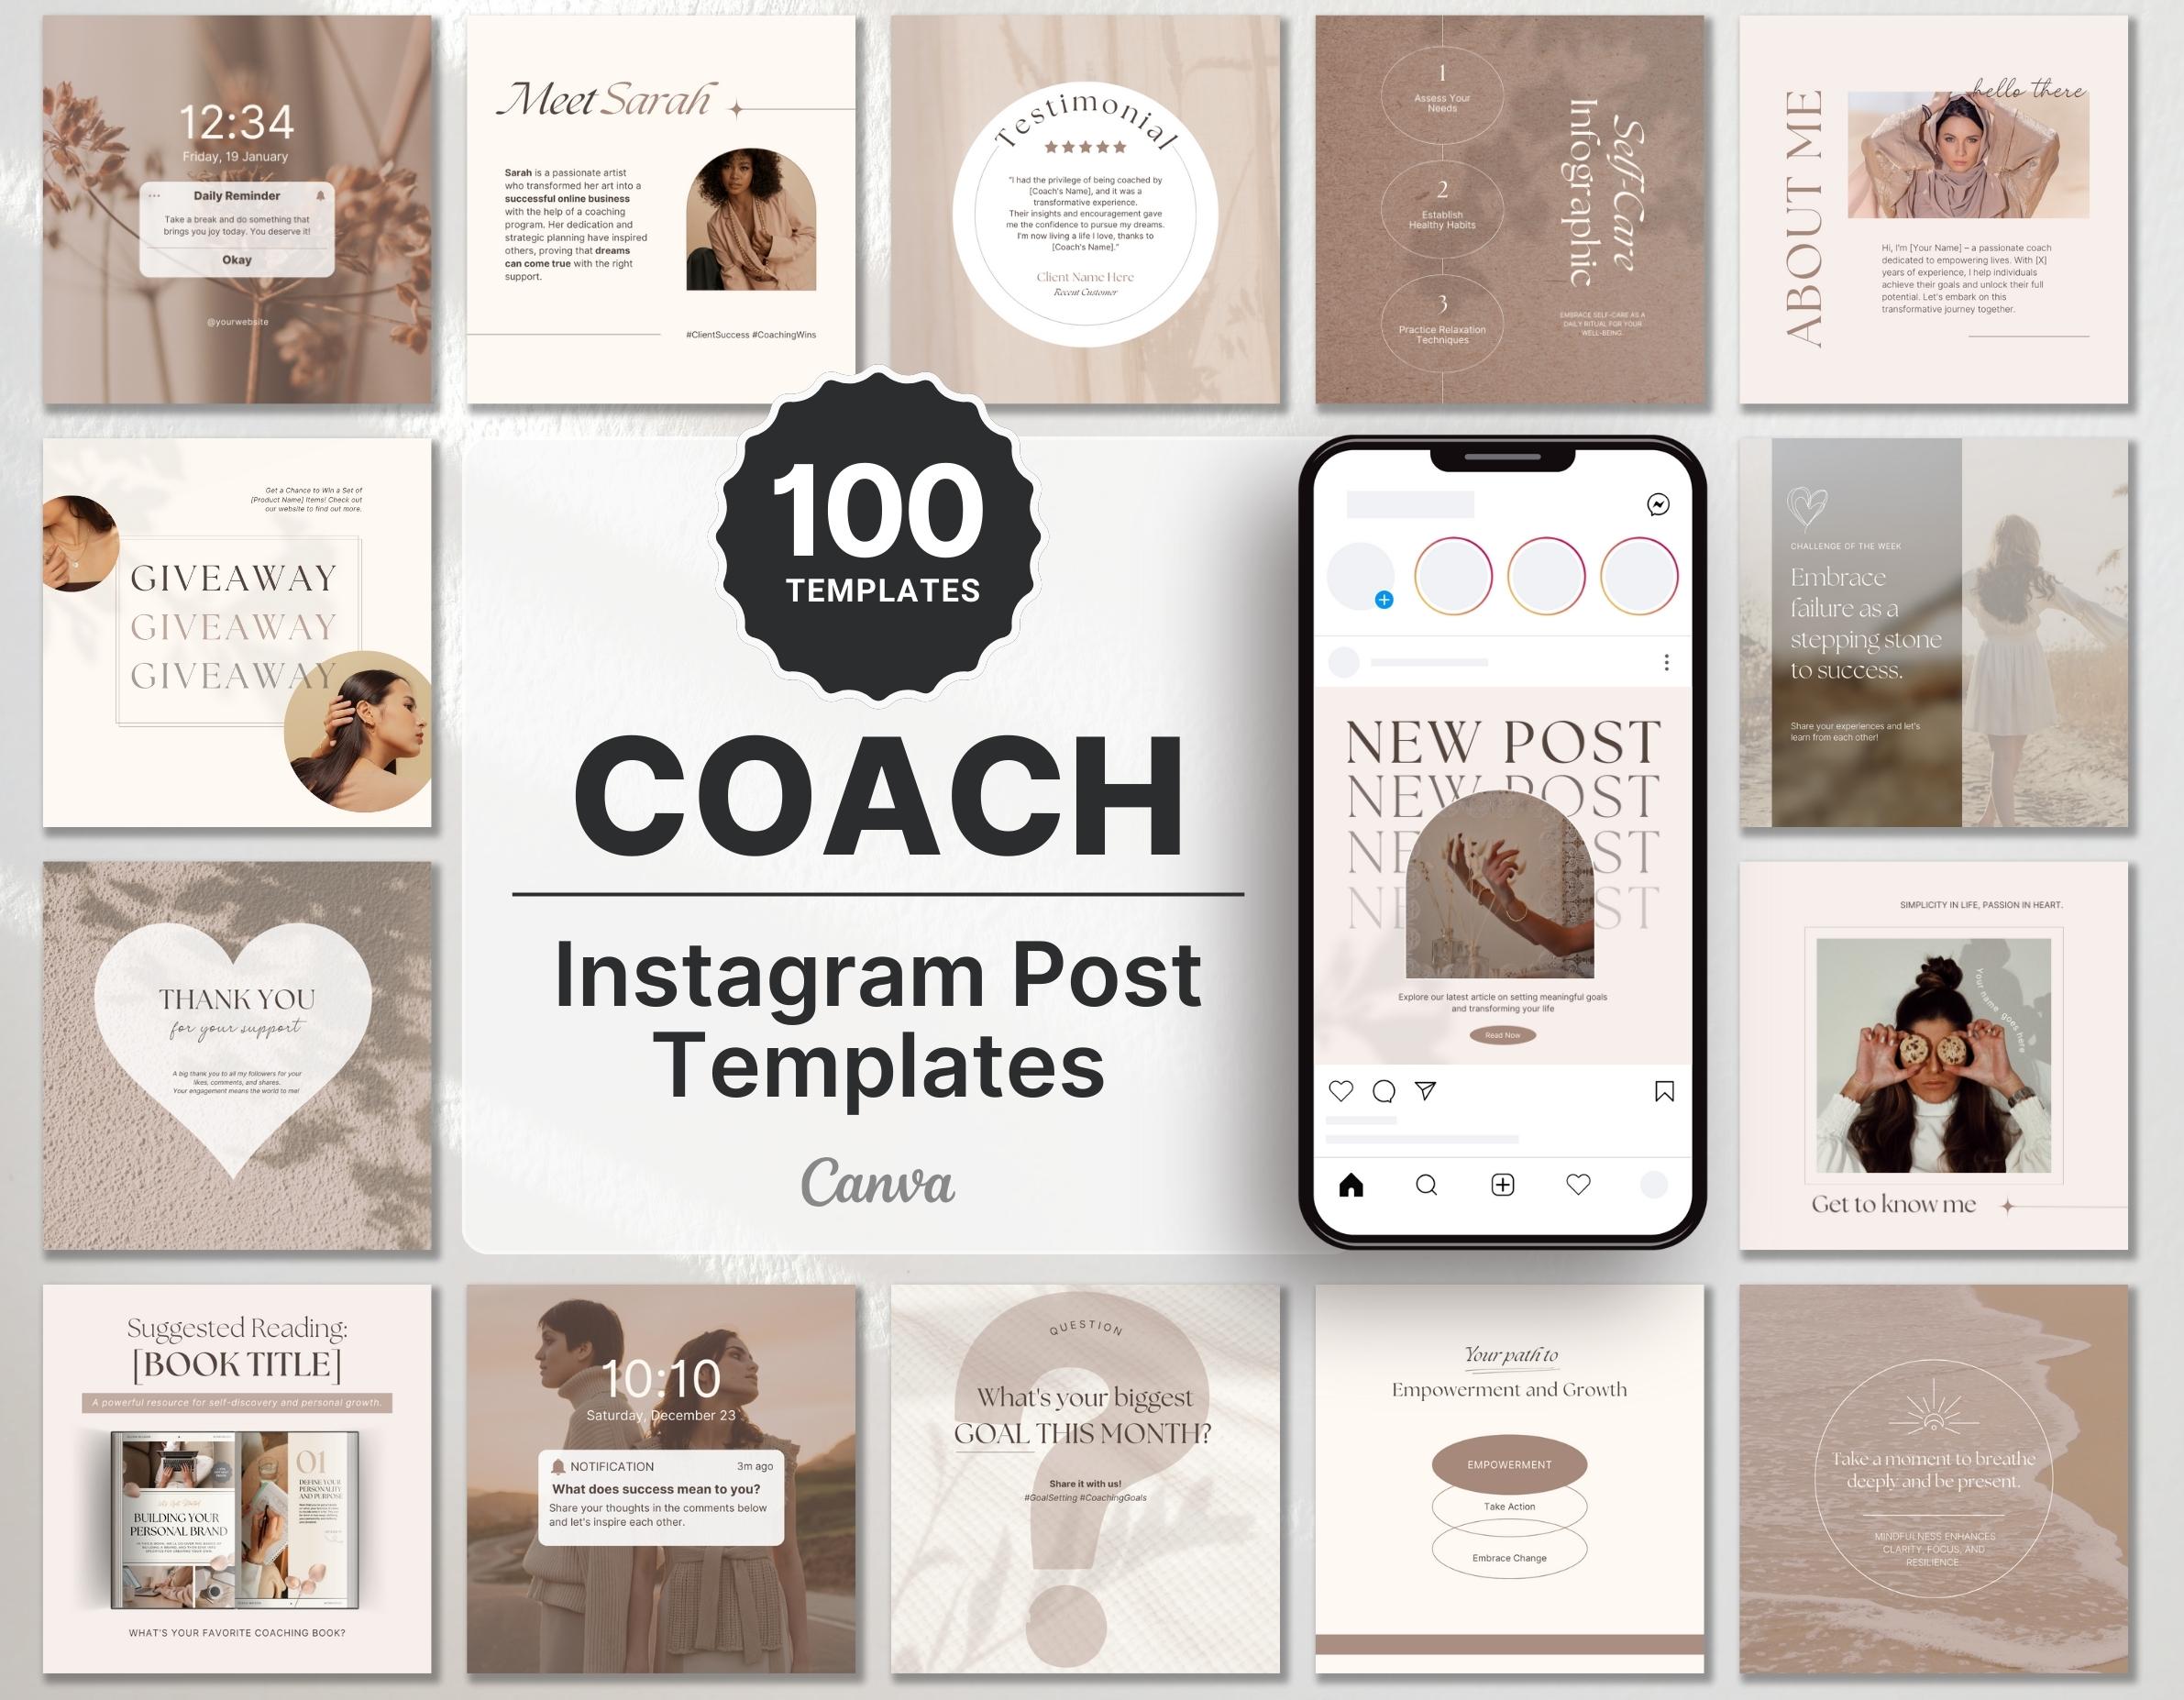 Coach Instagram Post Templates Beige Cover Mockup